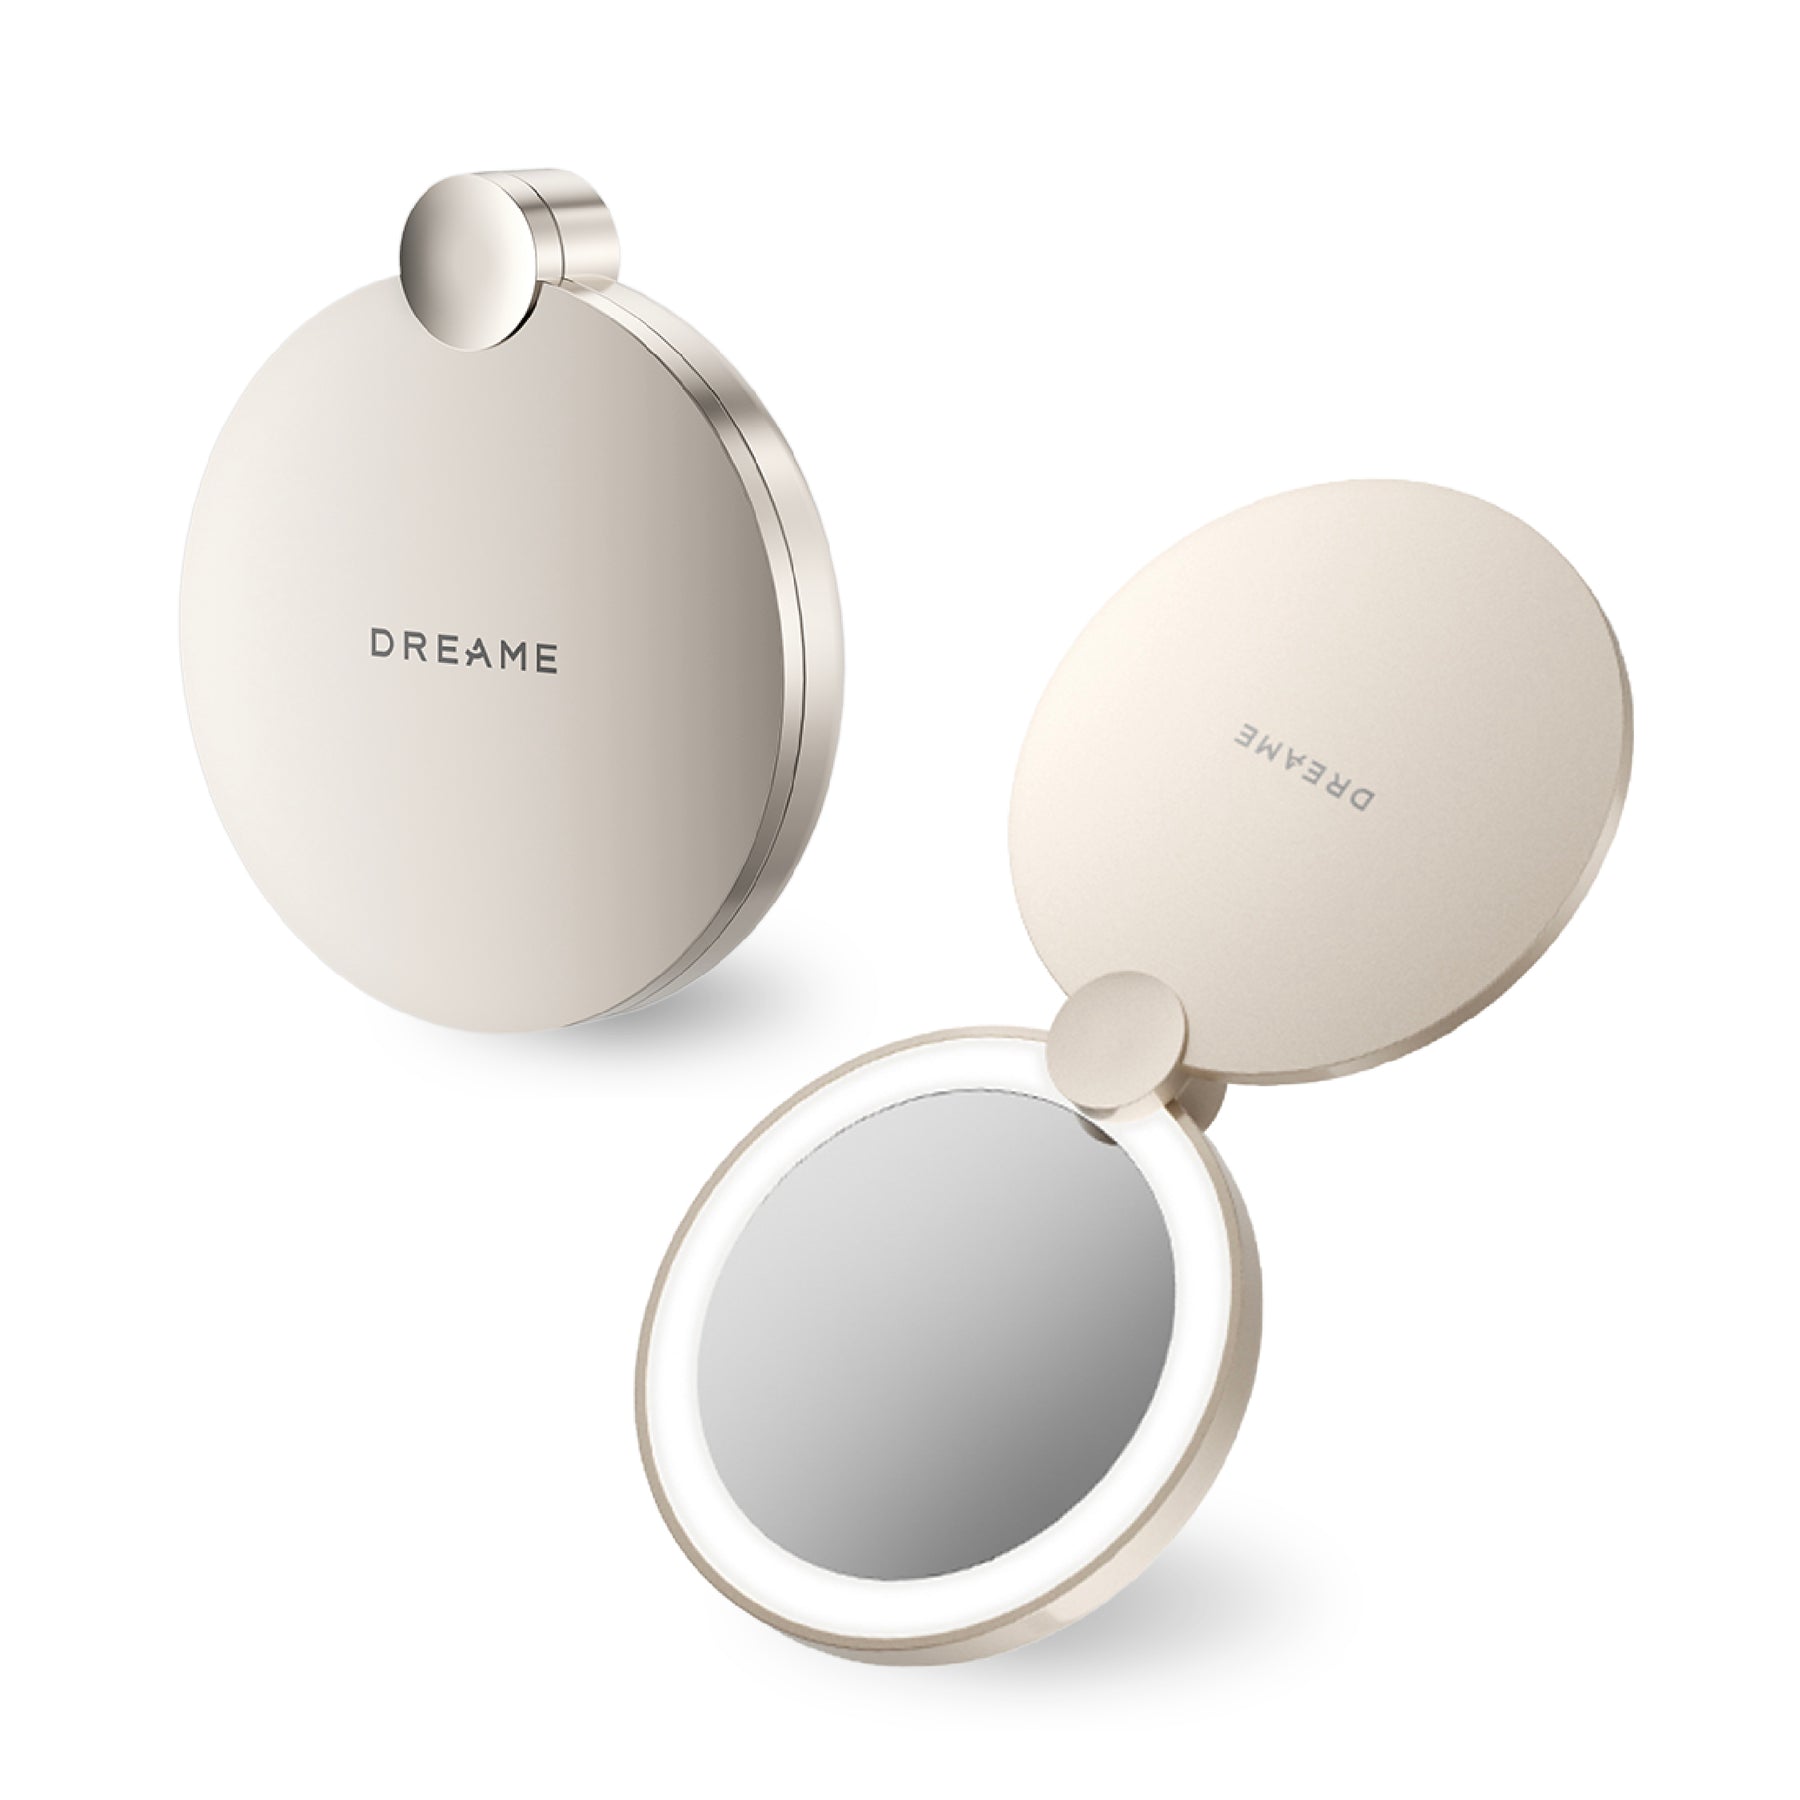 【Premium】Dreame Beauty Mirror | LED Ring Light | Restores Beauty in HD | Wireless Charging | Travel-Friendly